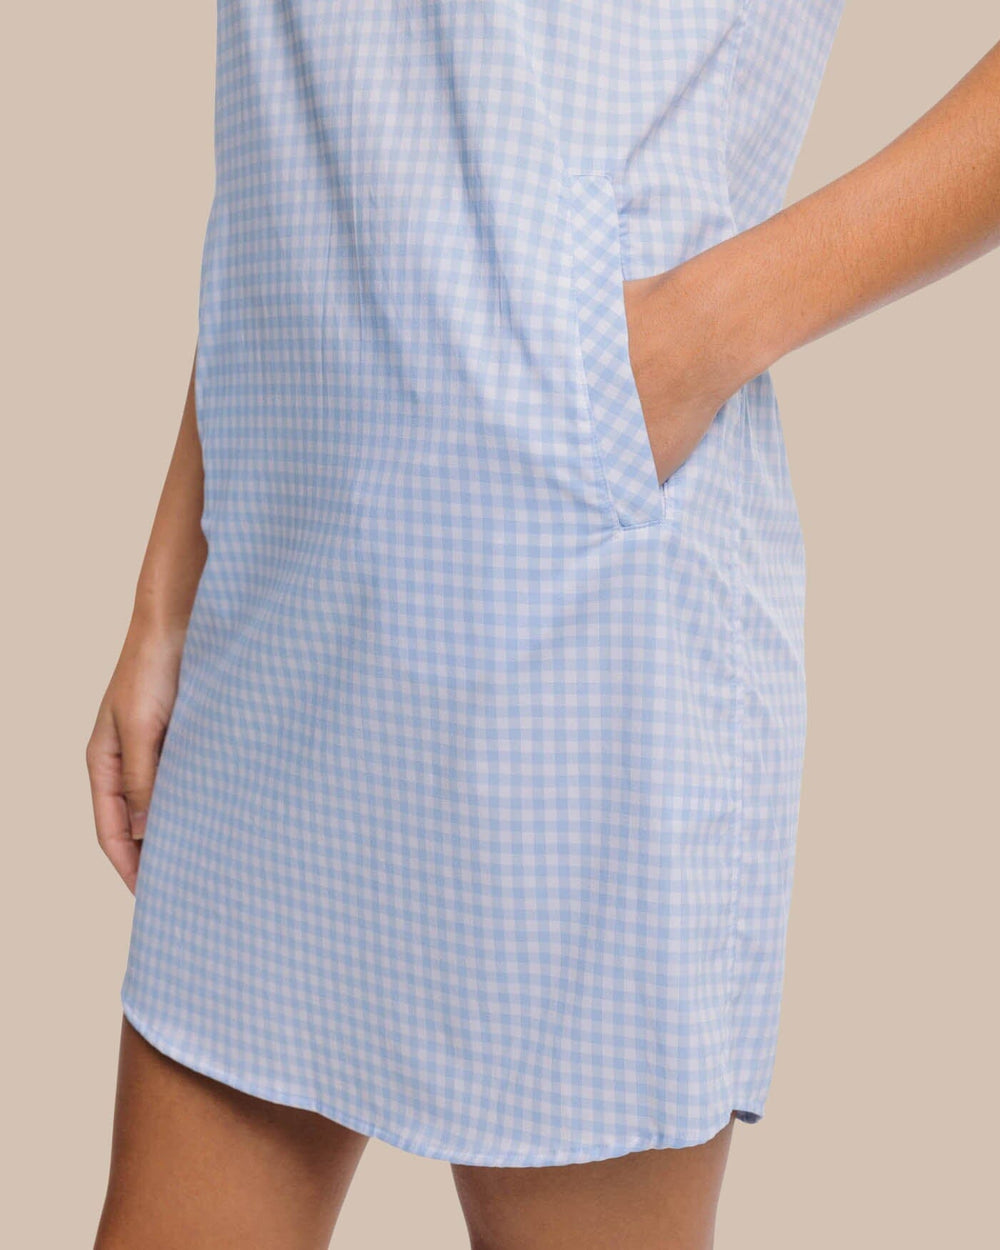 The detail view of the Southern Tide Kamryn brrr°® Intercoastal Gingham Dress by Southern Tide - Sky Blue